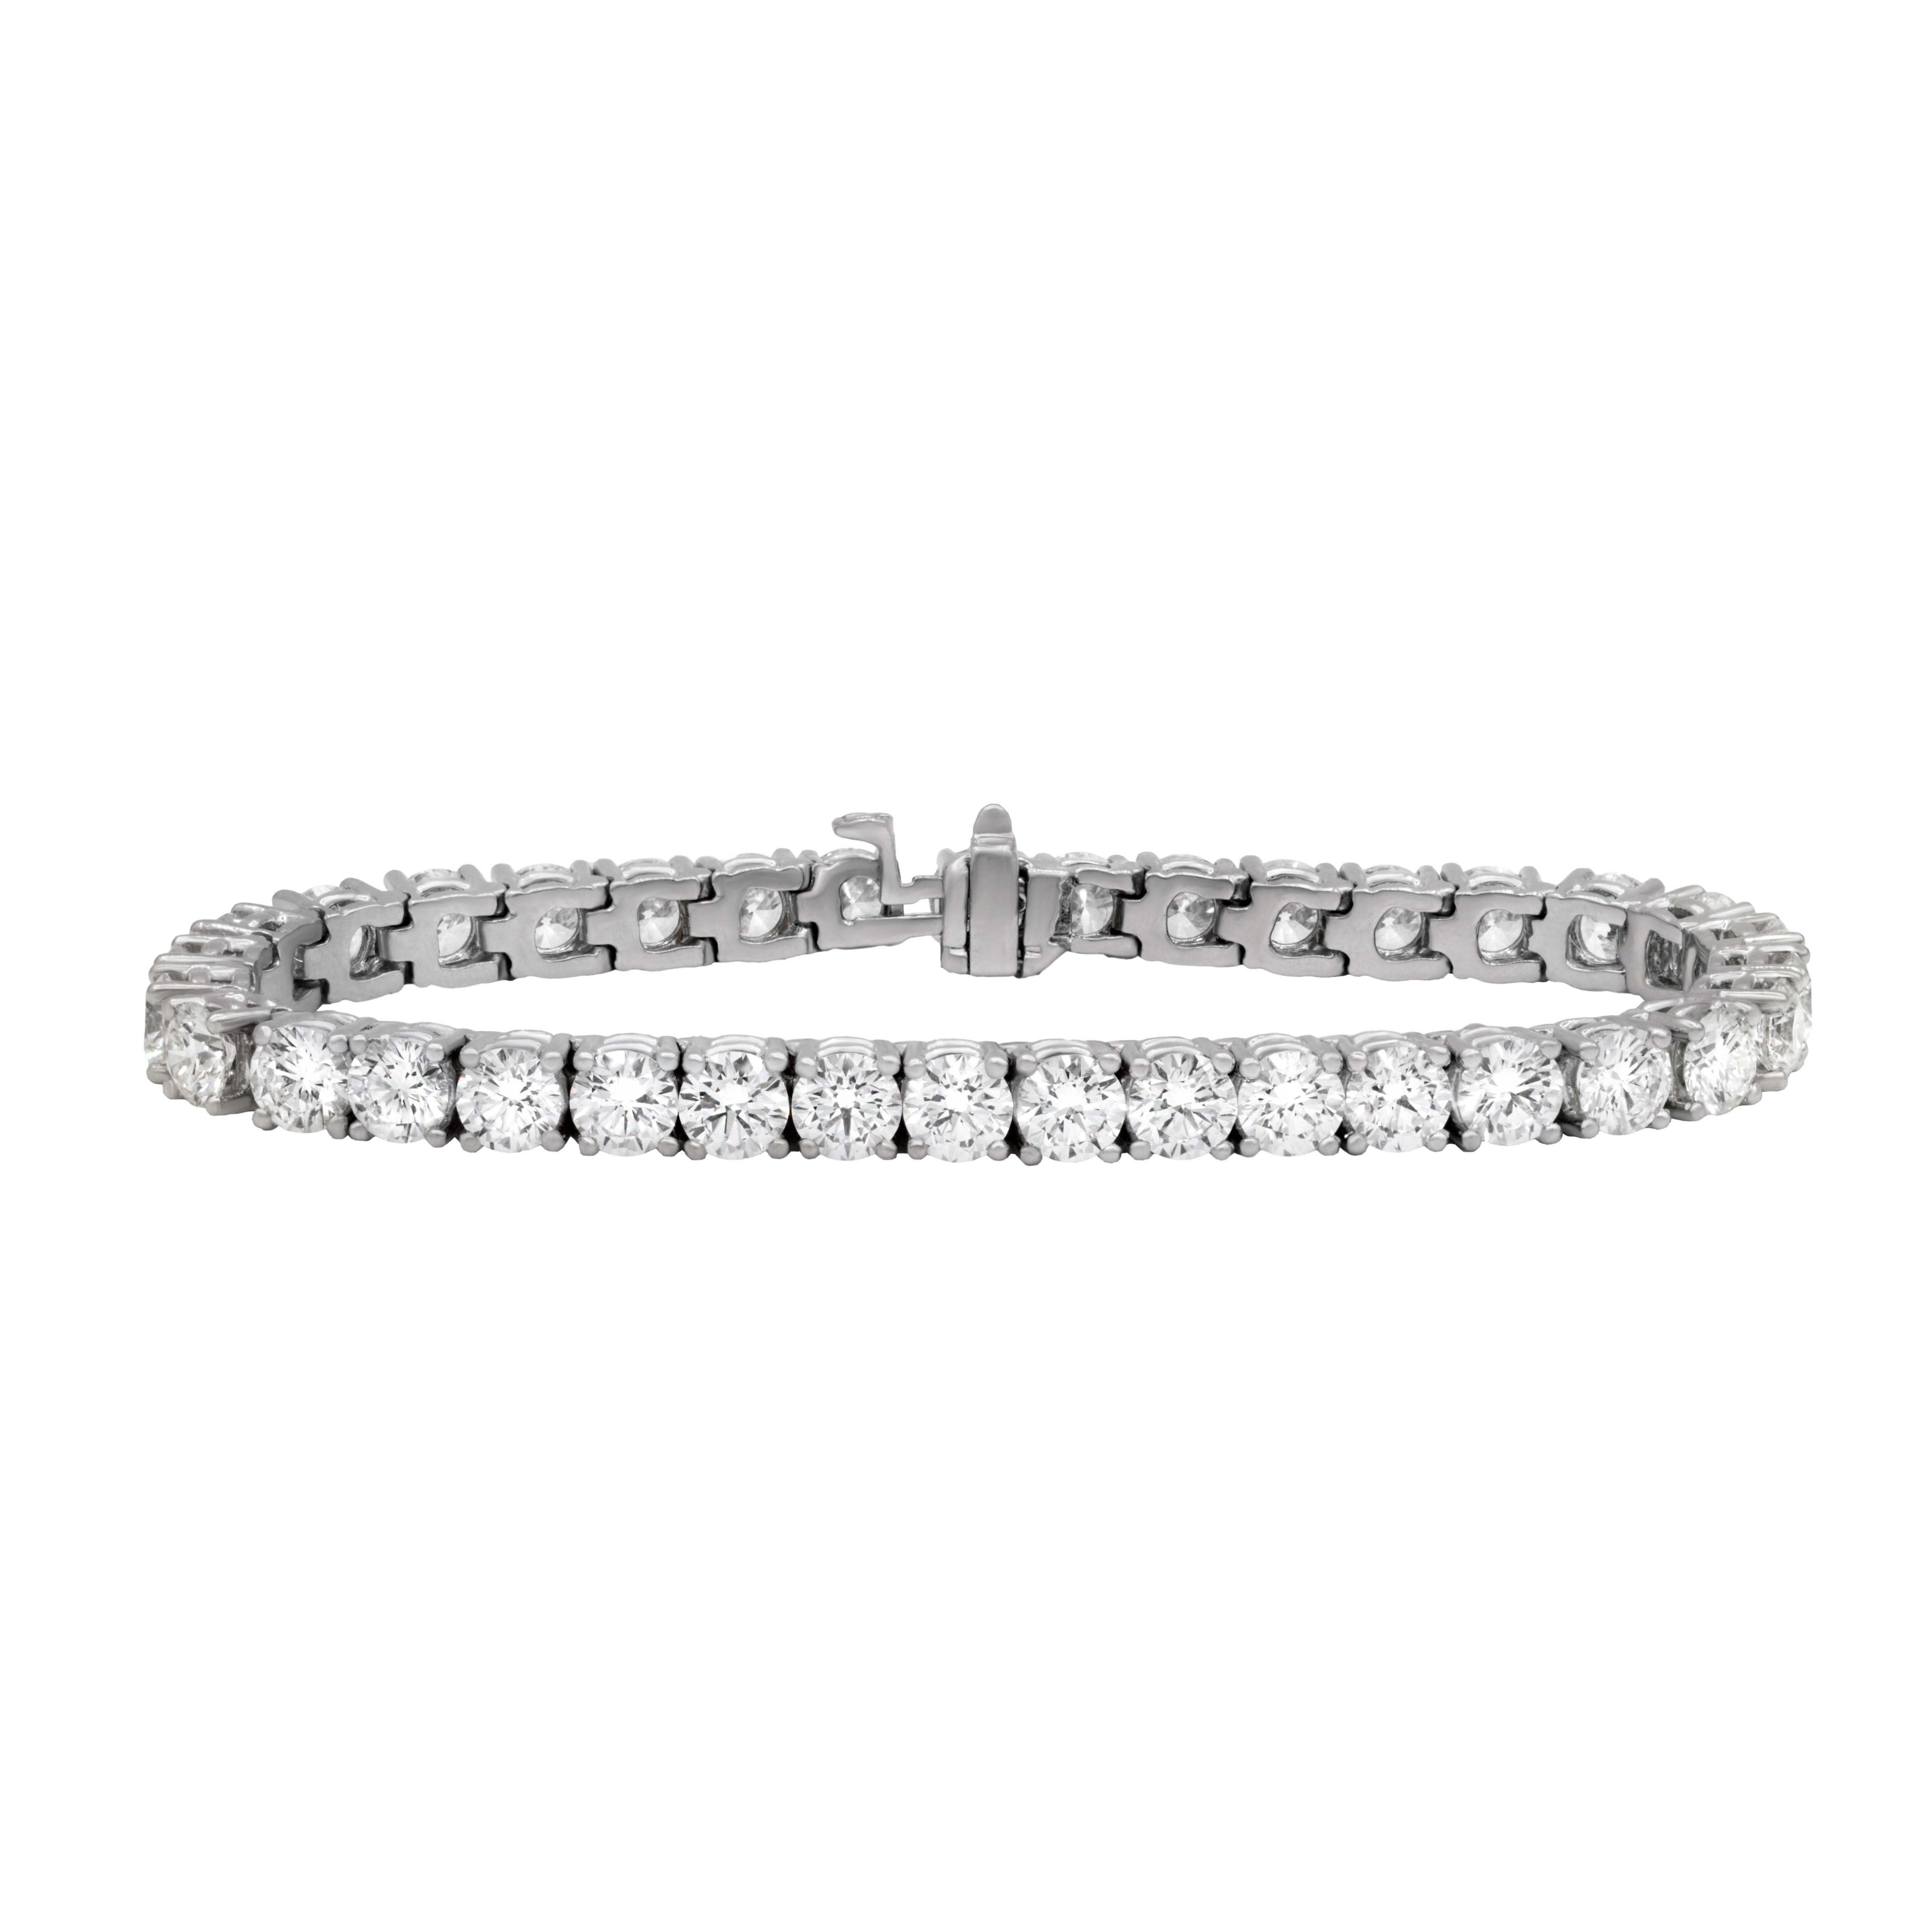 18 kt white gold 4 prong diamond tennis bracelet adorned with 14.36 cts tw of GIA certified round diamonds (F-G color, VS1-VS2 clarity, 35 stones)
Diana M. is a leading supplier of top-quality fine jewelry for over 35 years.
Diana M is one-stop shop